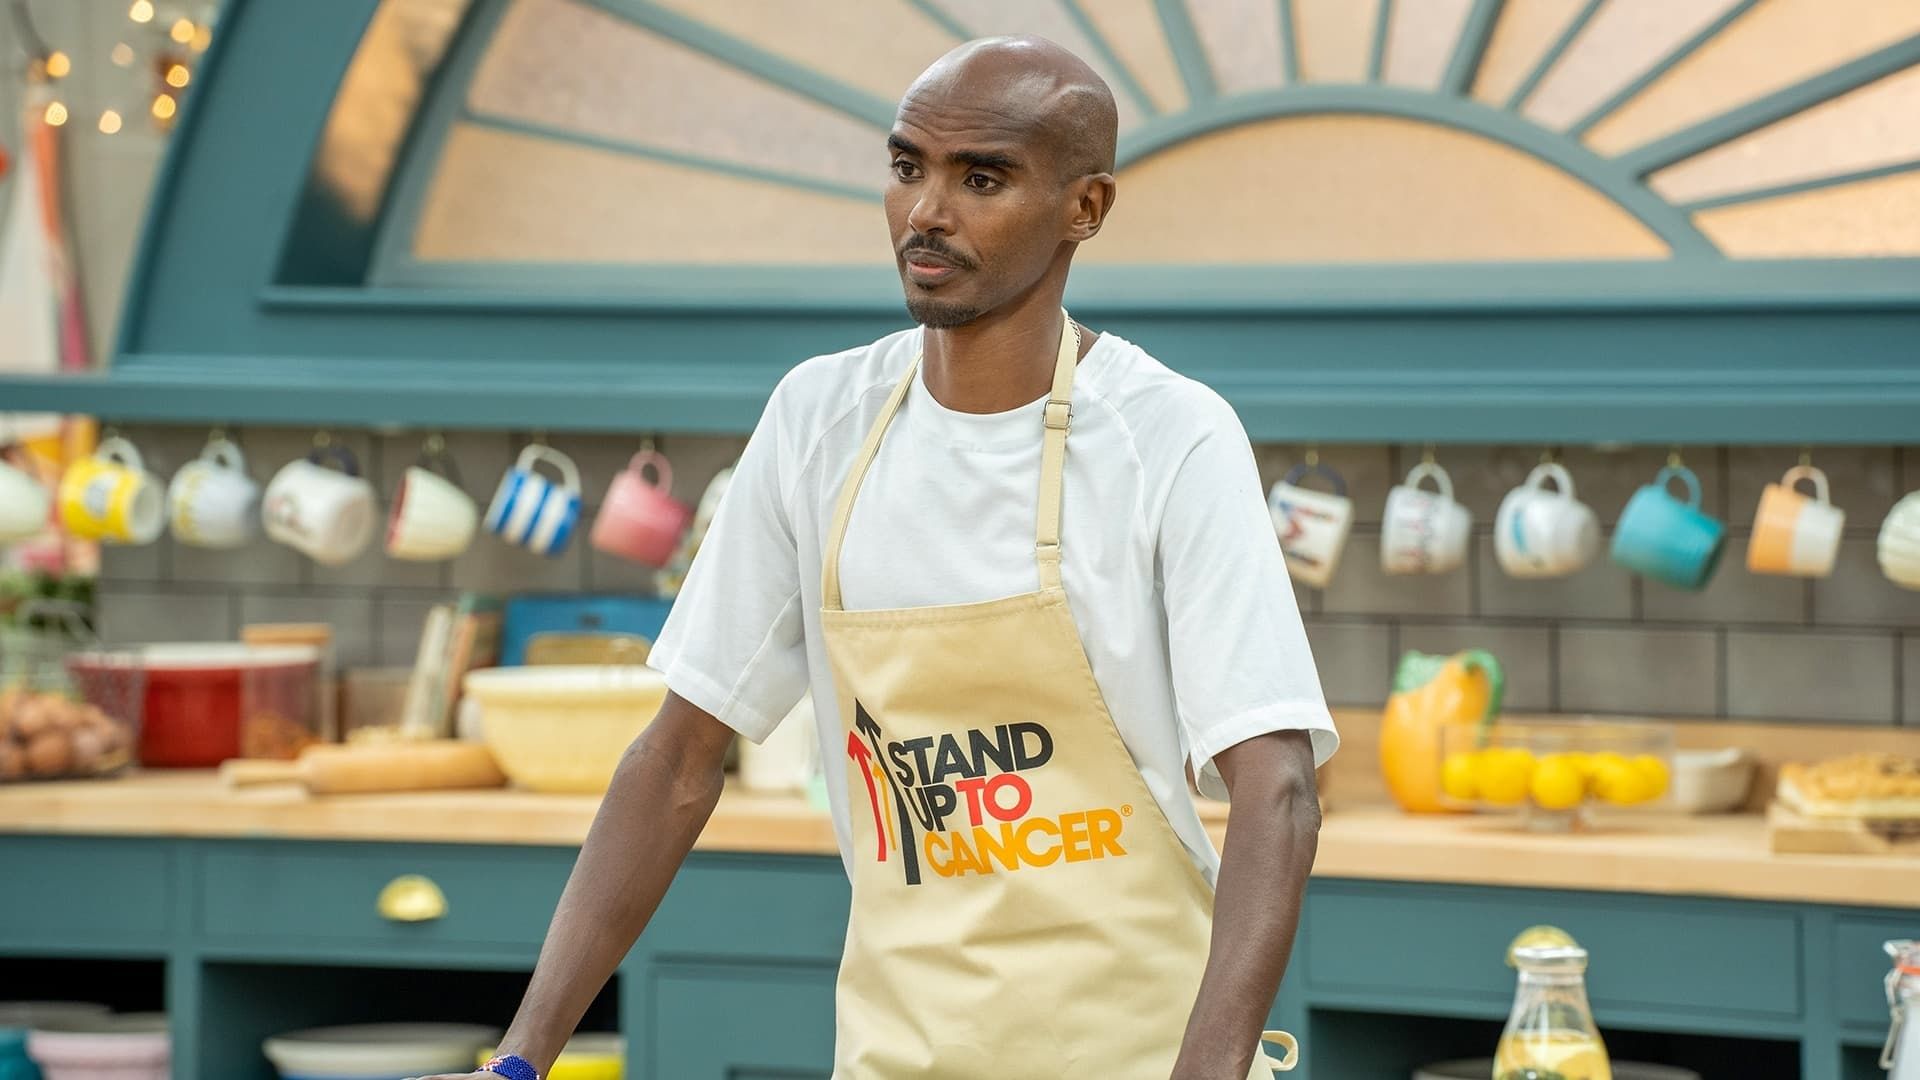 The Great Celebrity Bake Off for SU2C background